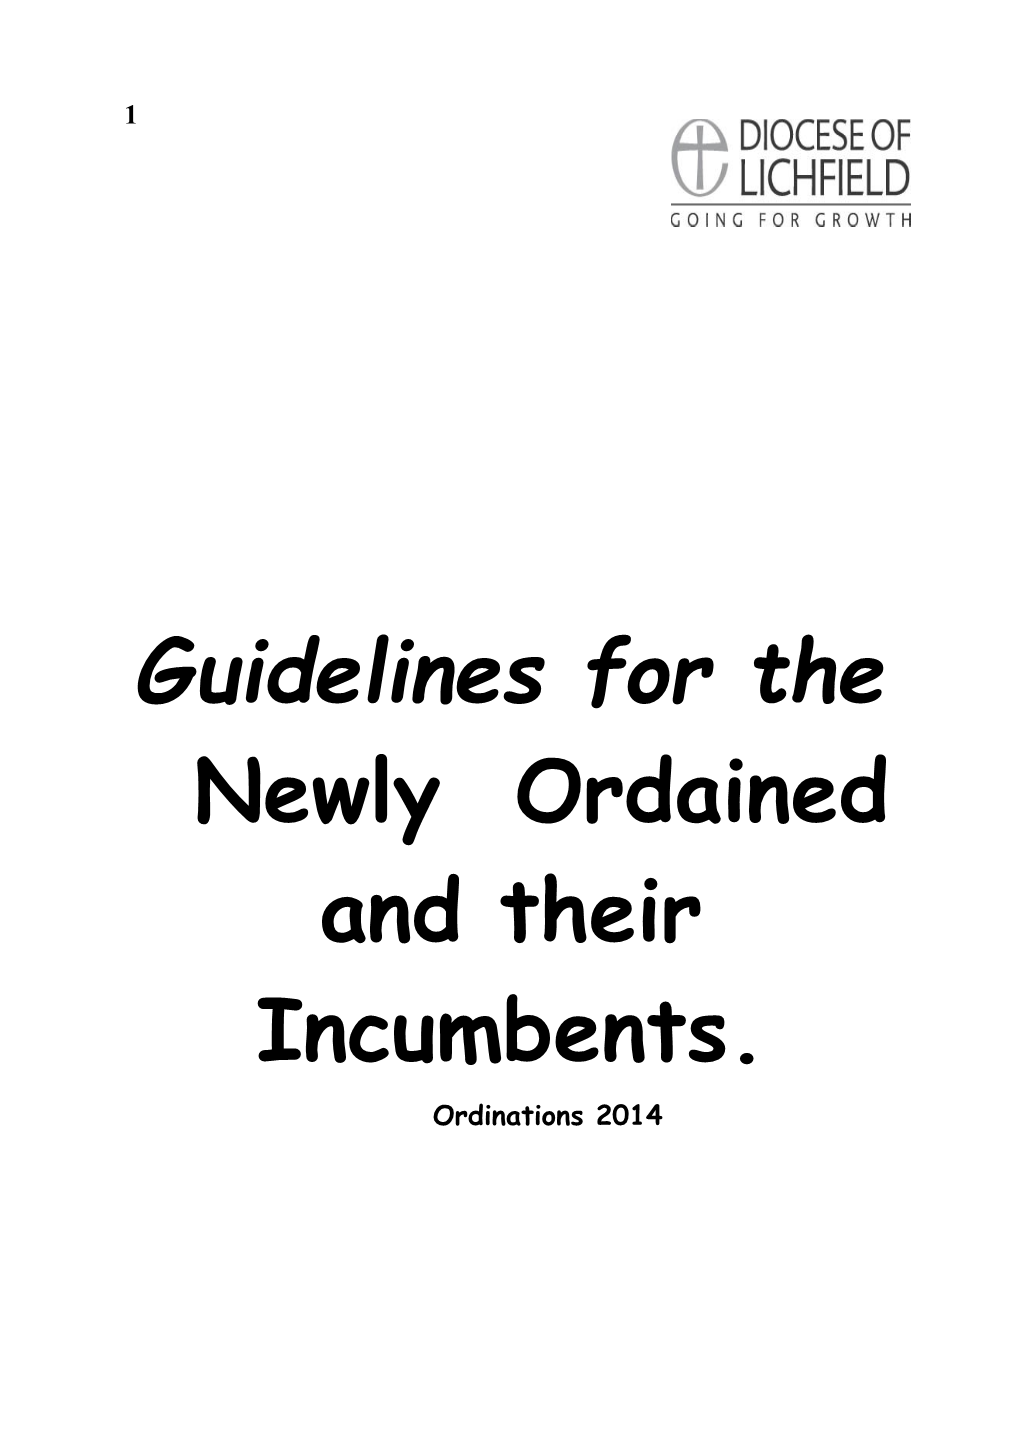 Guidelines for Thenewly Ordainedand Their